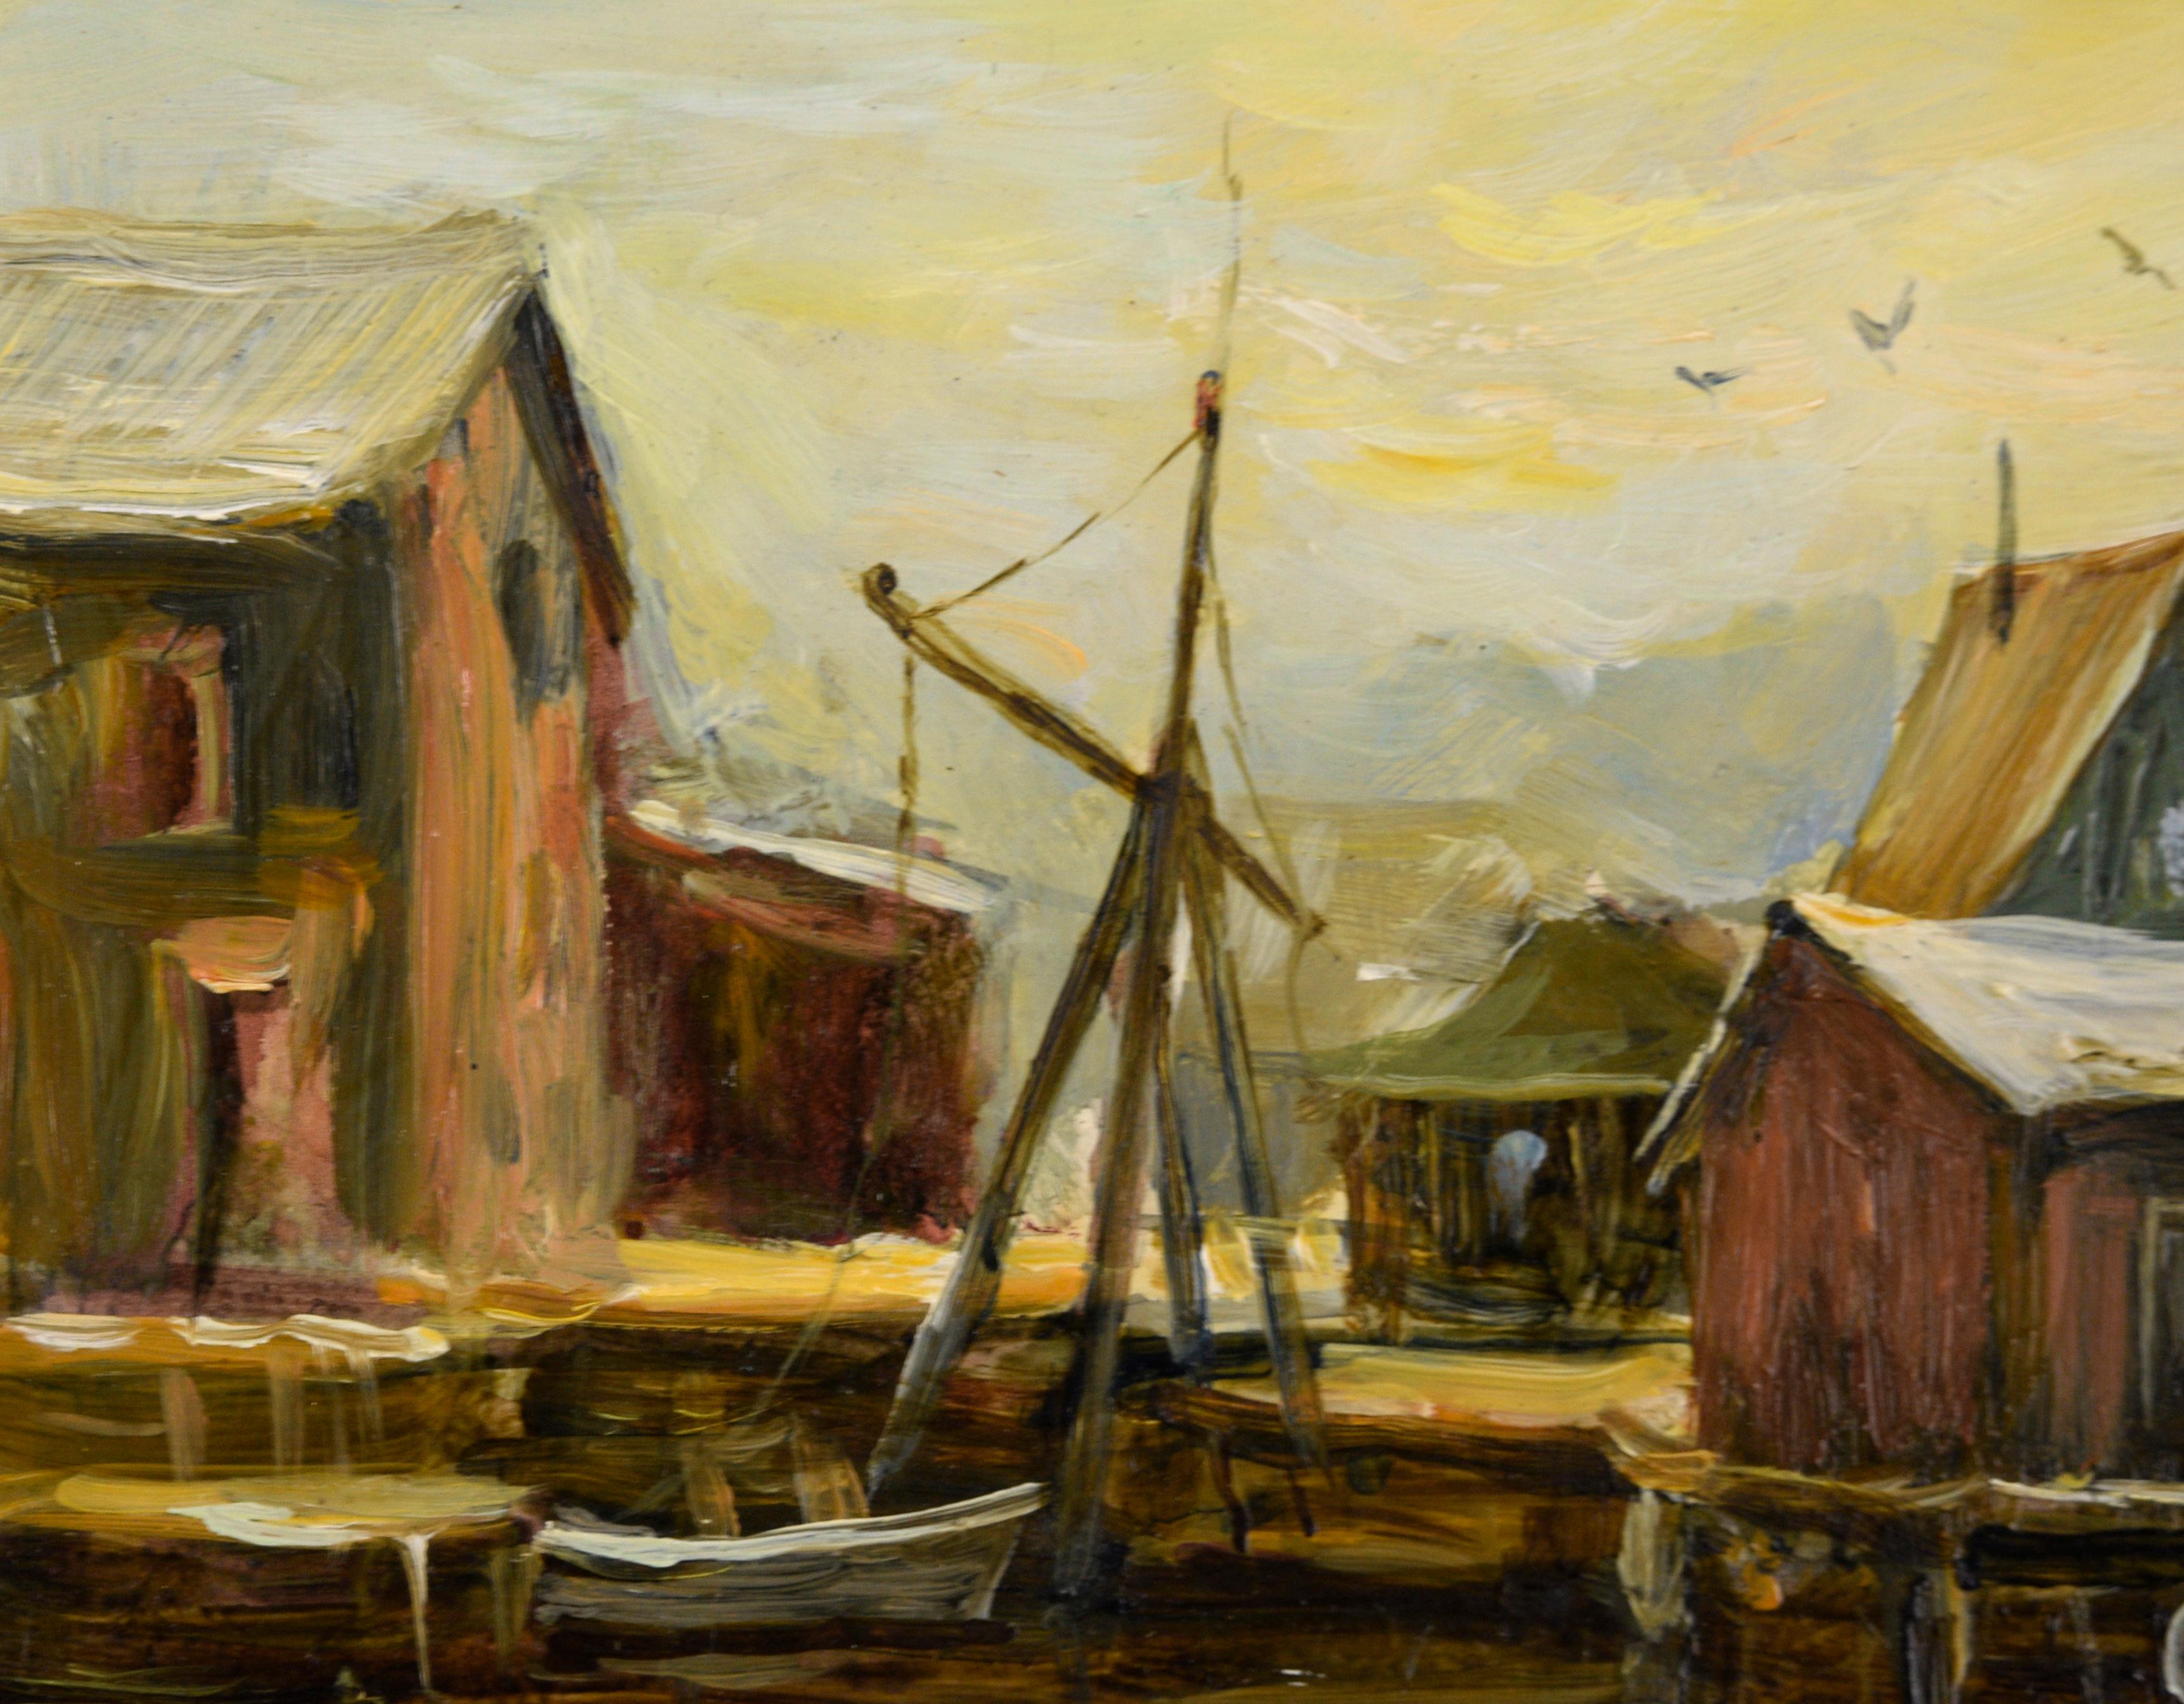 At the Docks, Plein Air Seascape - Painting by Dean Packer